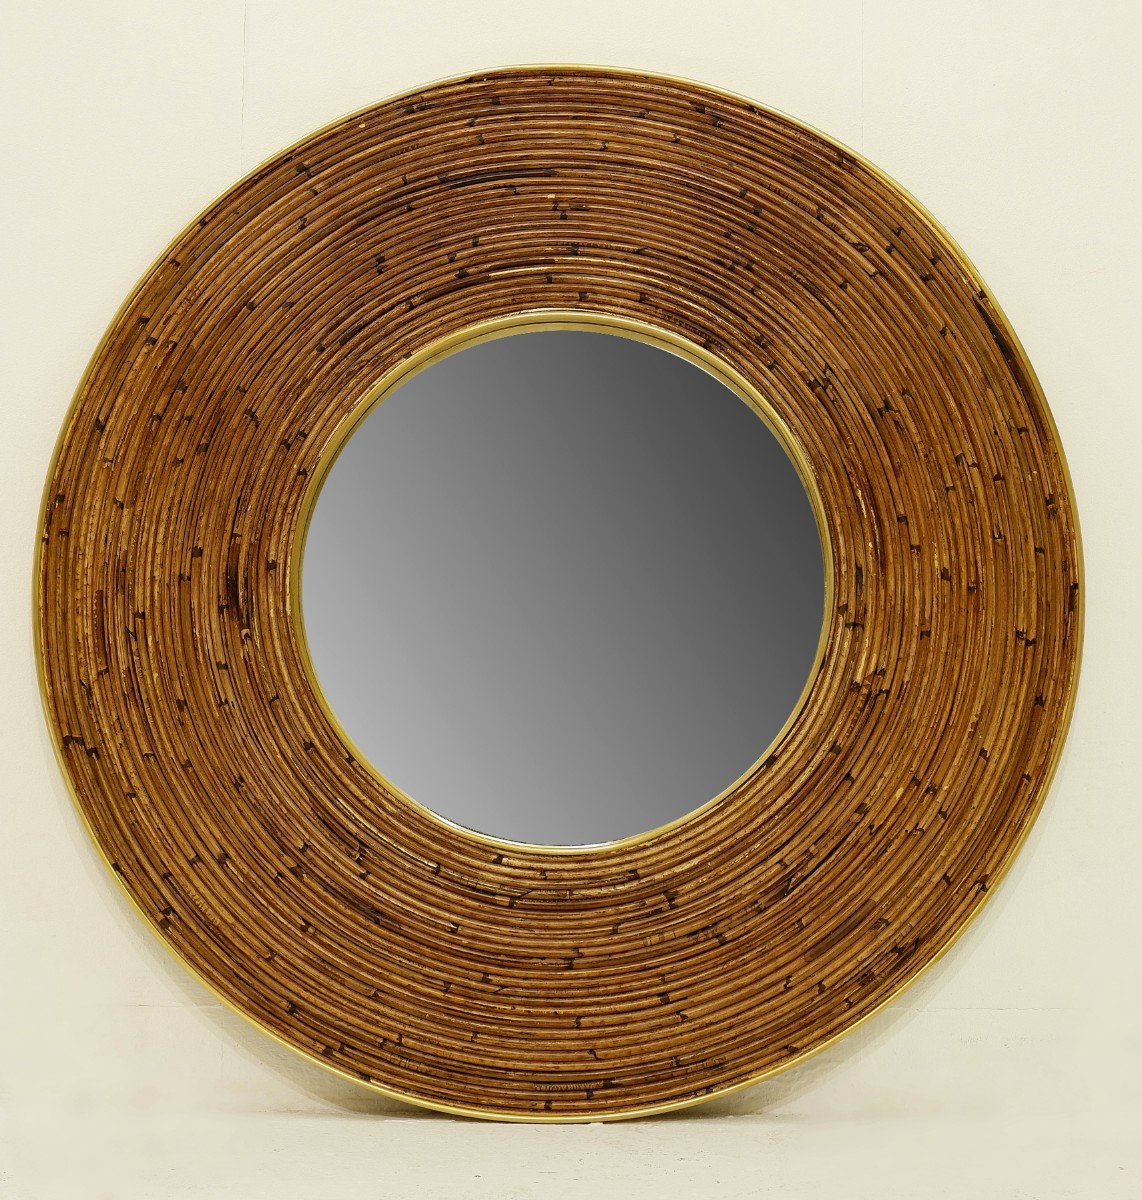 large-round-bamboo-mirror-1-available-18